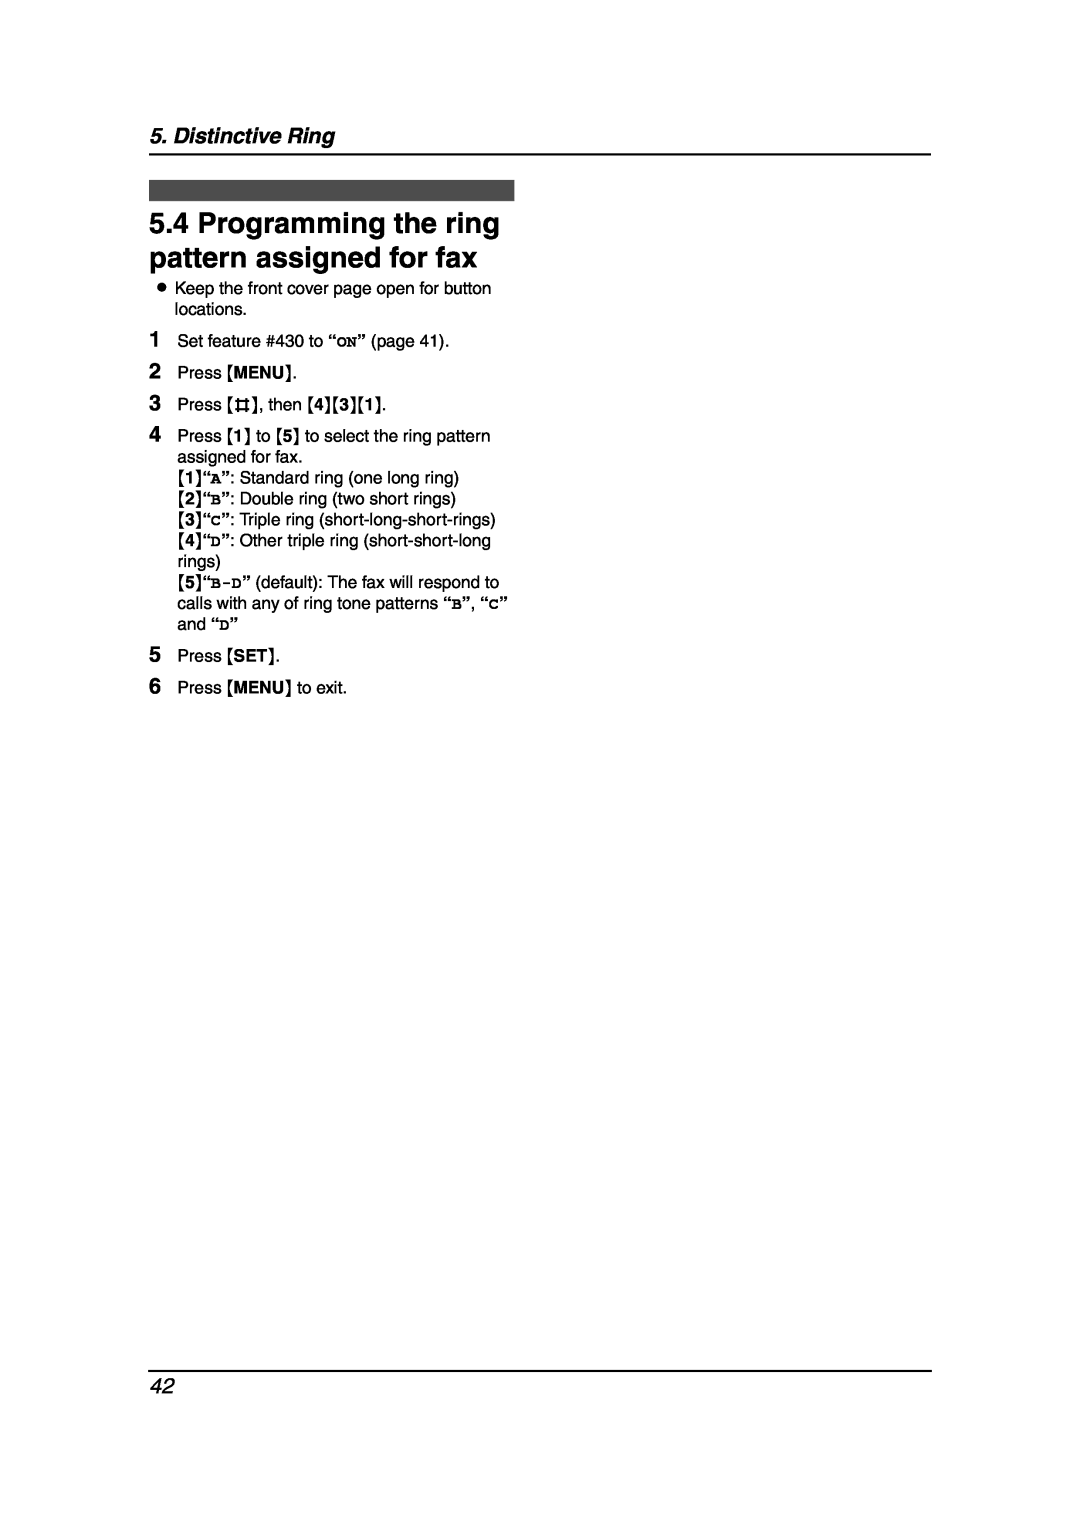 Panasonic KX-FLB851 manual Programming the ring pattern assigned for fax, Distinctive Ring 